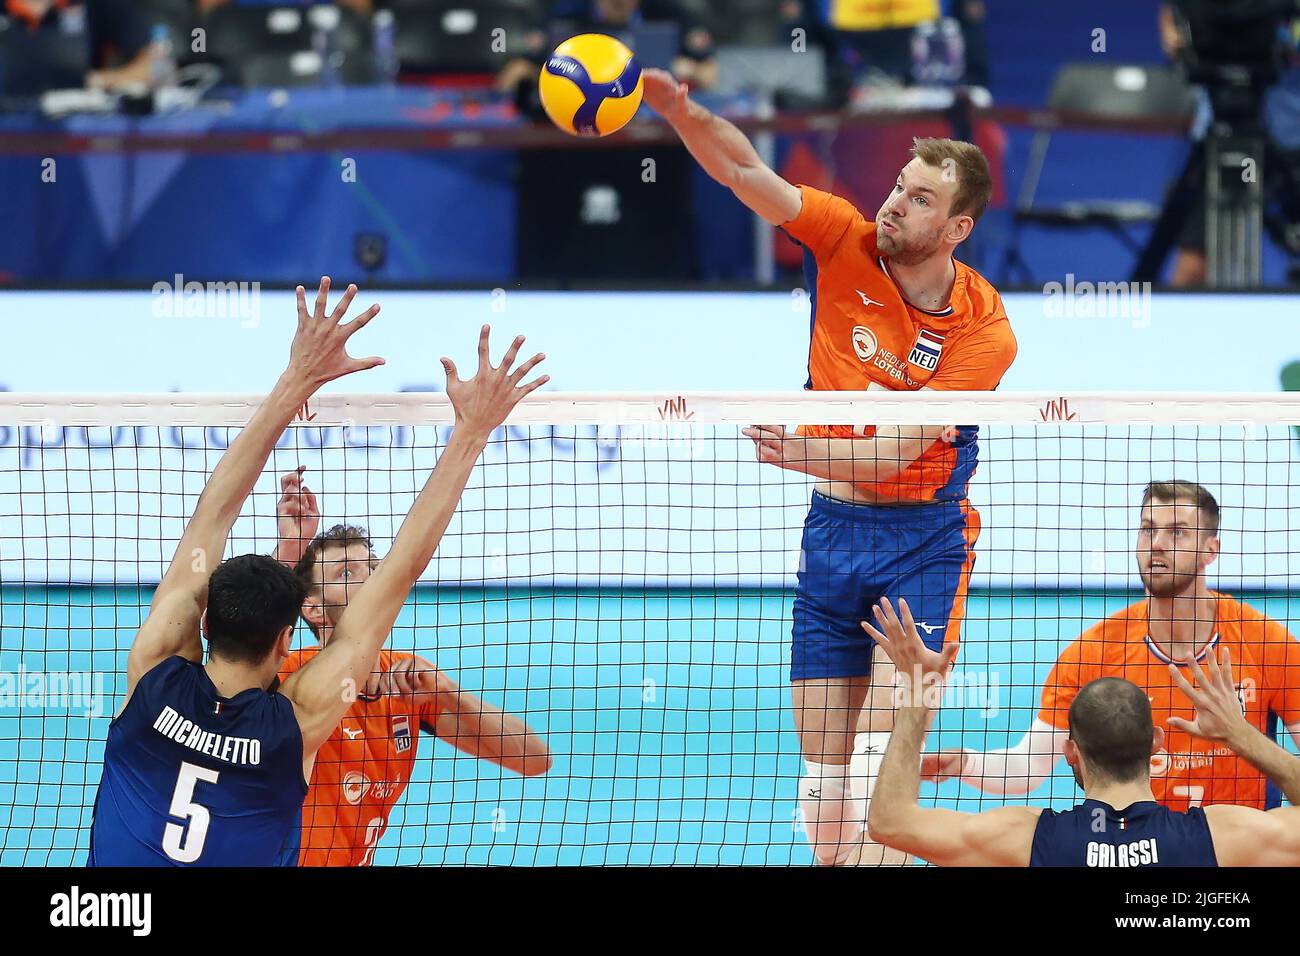 Gdansk, Poland. 10th July, 2022. Alessandro Michieletto (L) of Italy and Luuc van der Ent of the Netherlands during the 2022 men's FIVB Volleyball Nations League match between Italy and the Netherlands in Gdansk, Poland, 10 July 2022. Credit: PAP/Alamy Live News Stock Photo